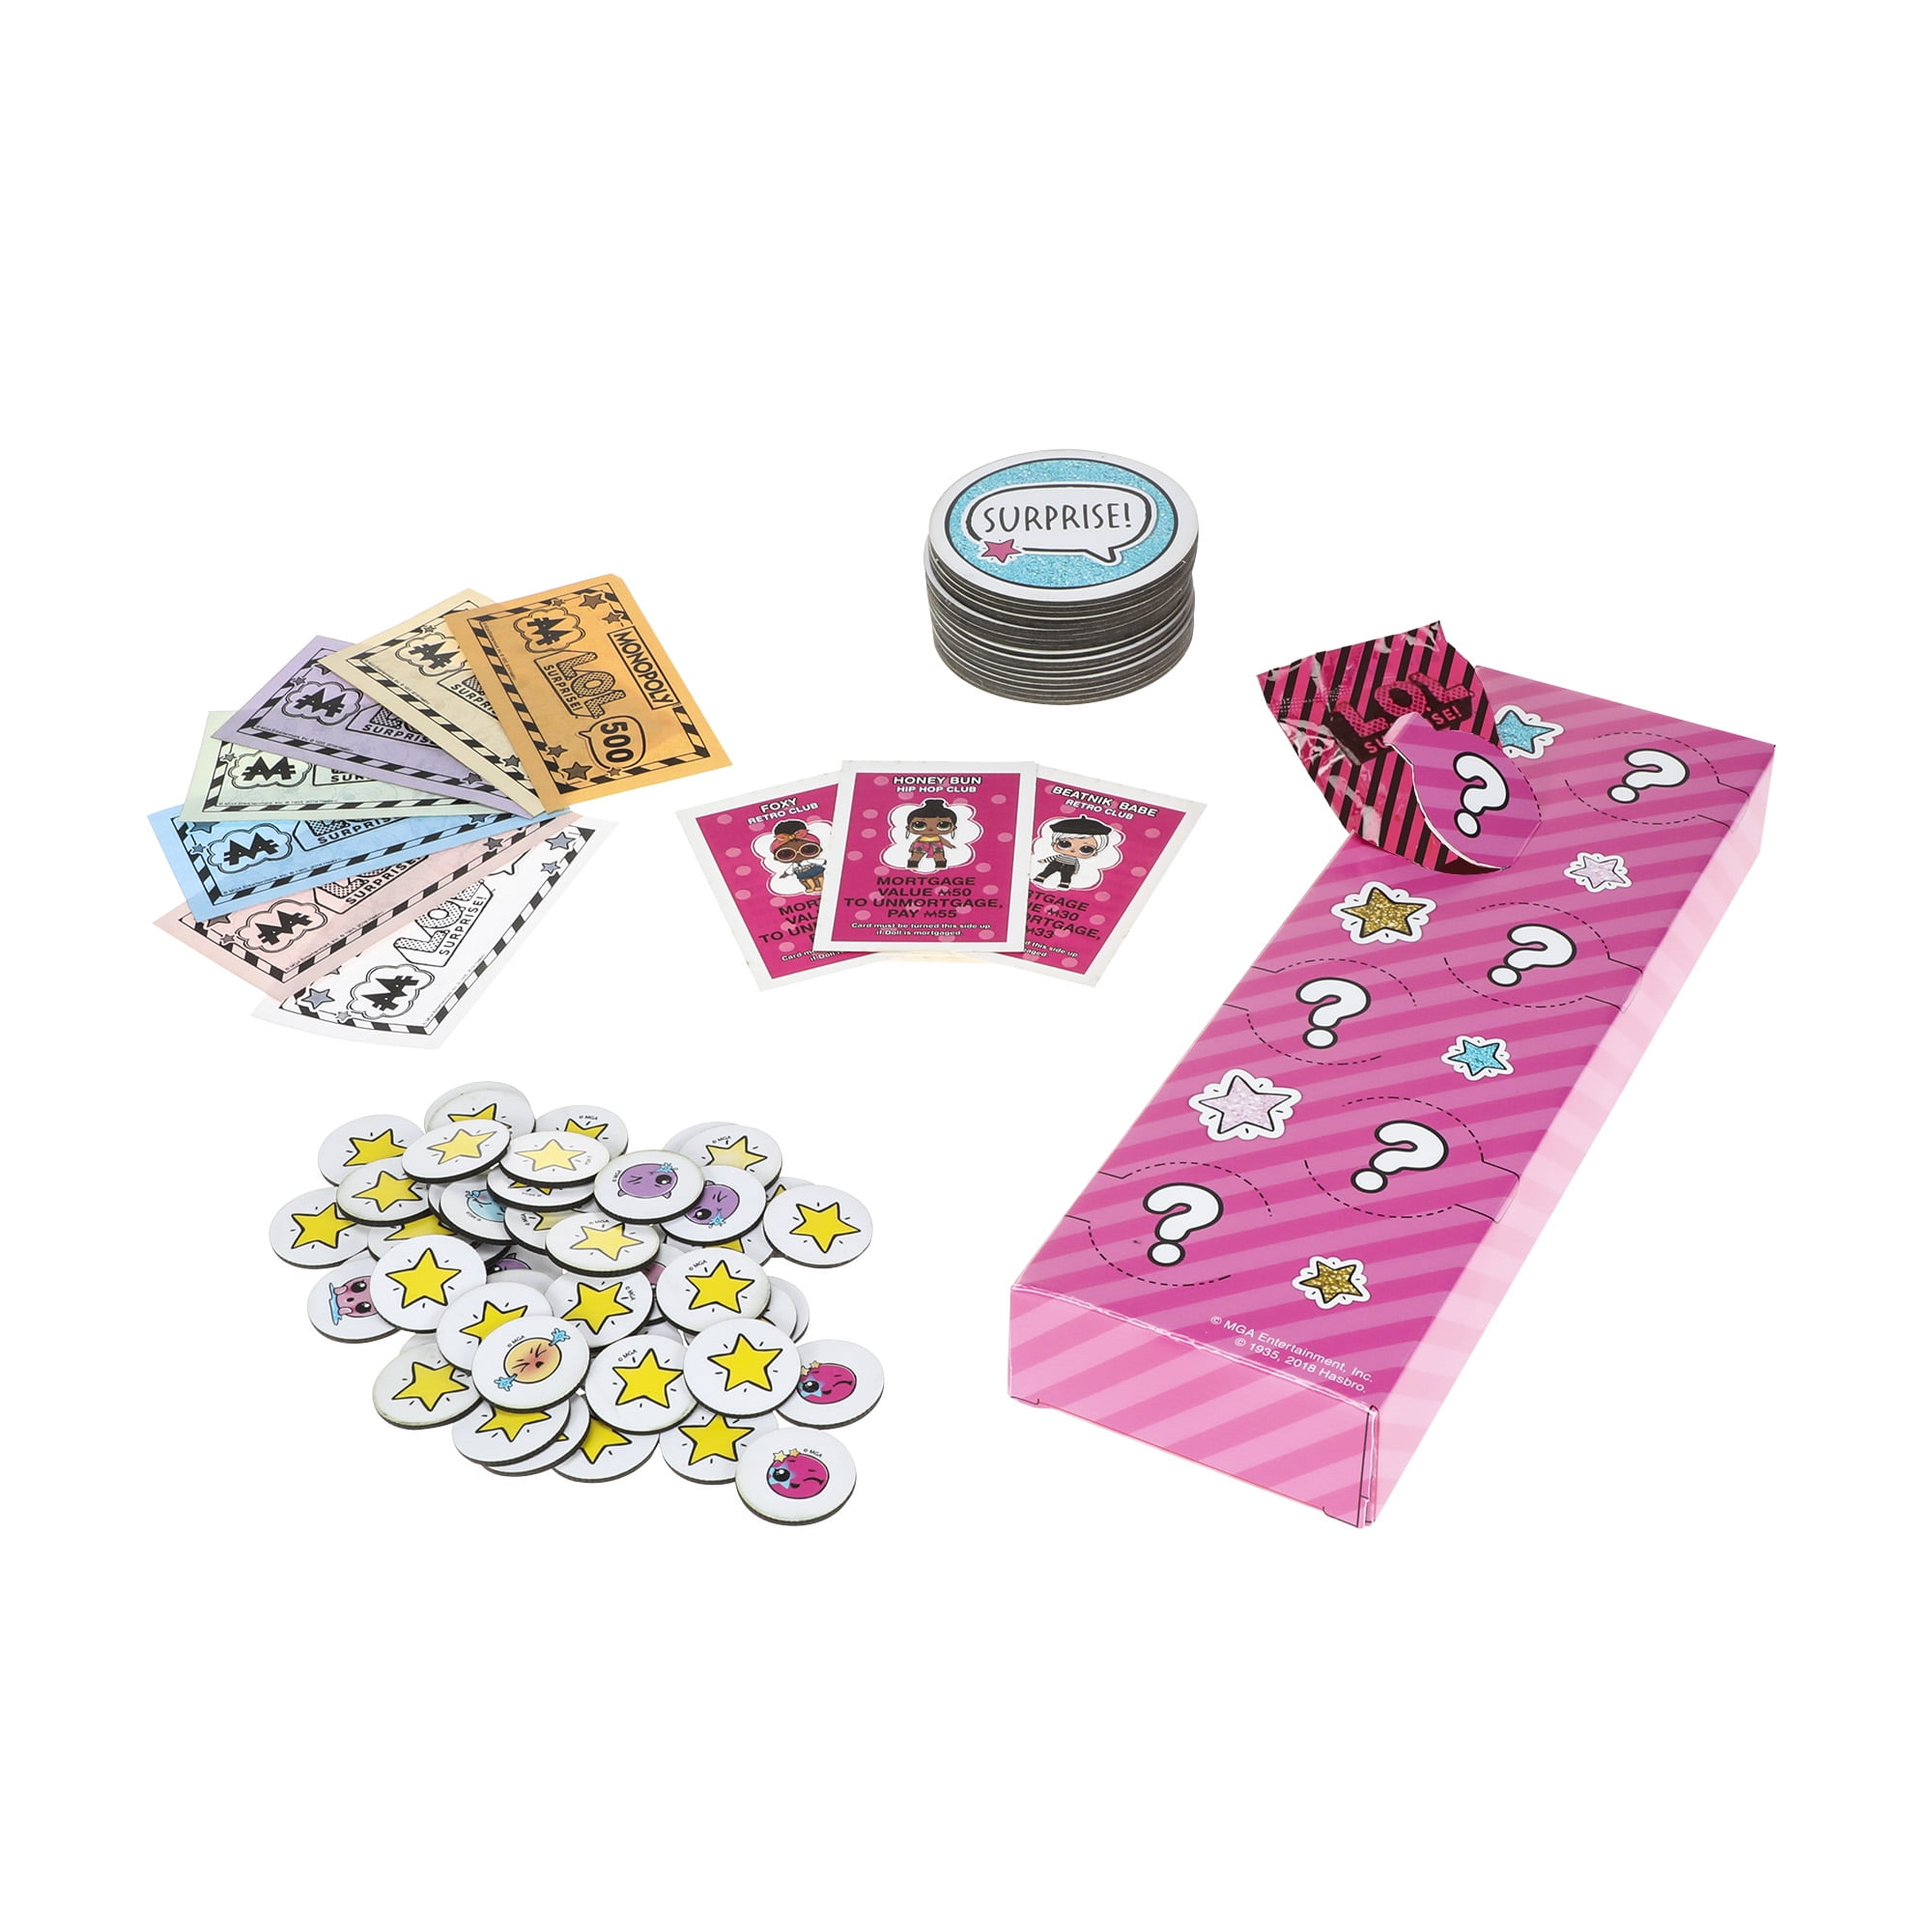 Merchandising Adolescent Cater Monopoly Game: L.O.L. SurprIse! Edition Board Game, Ages 8+ - Walmart.com